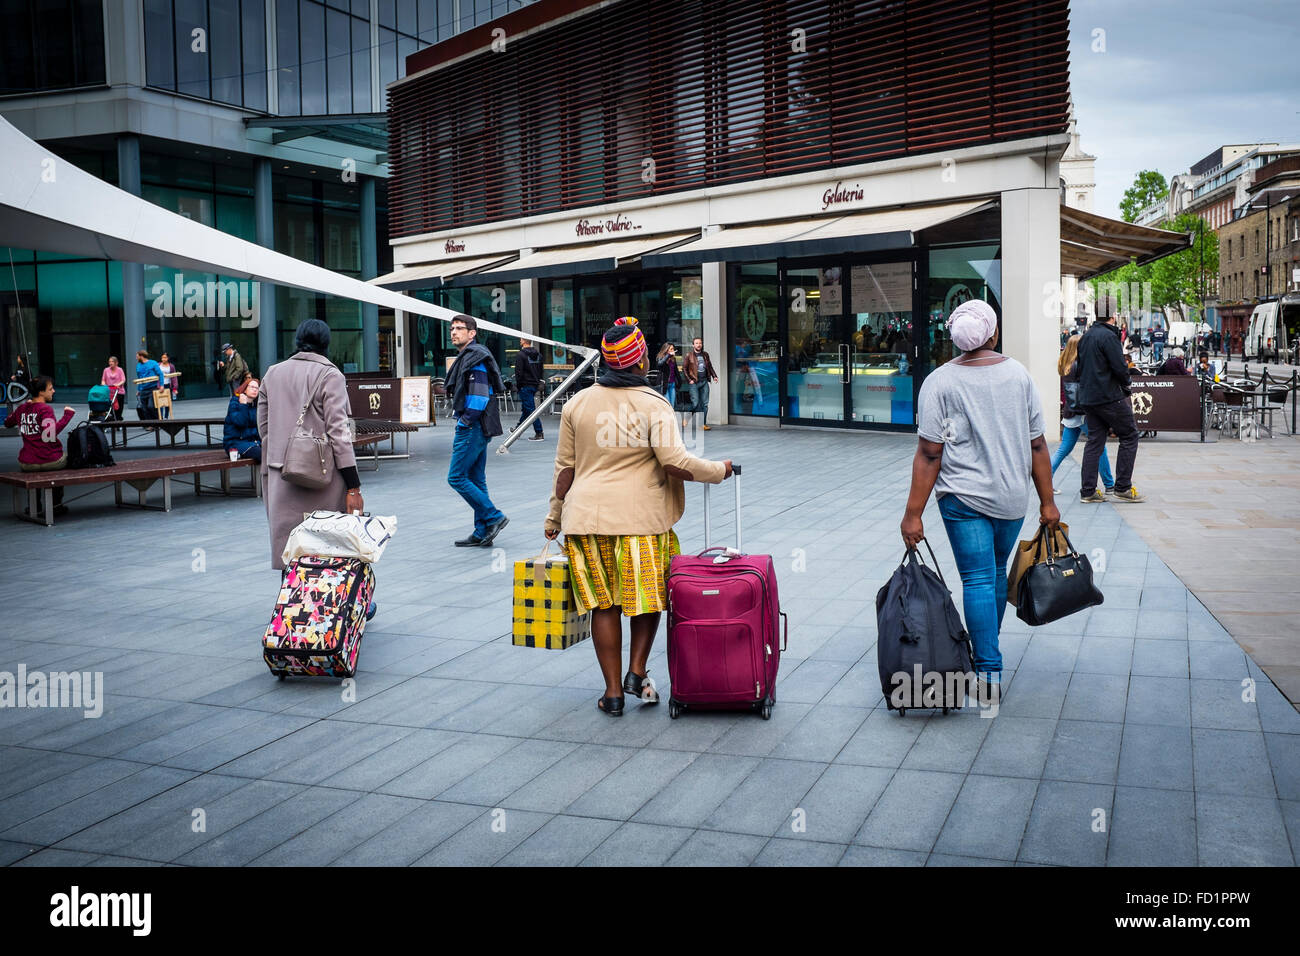 Three black women pulling luggage with wheels in the street of London, UK Stock Photo